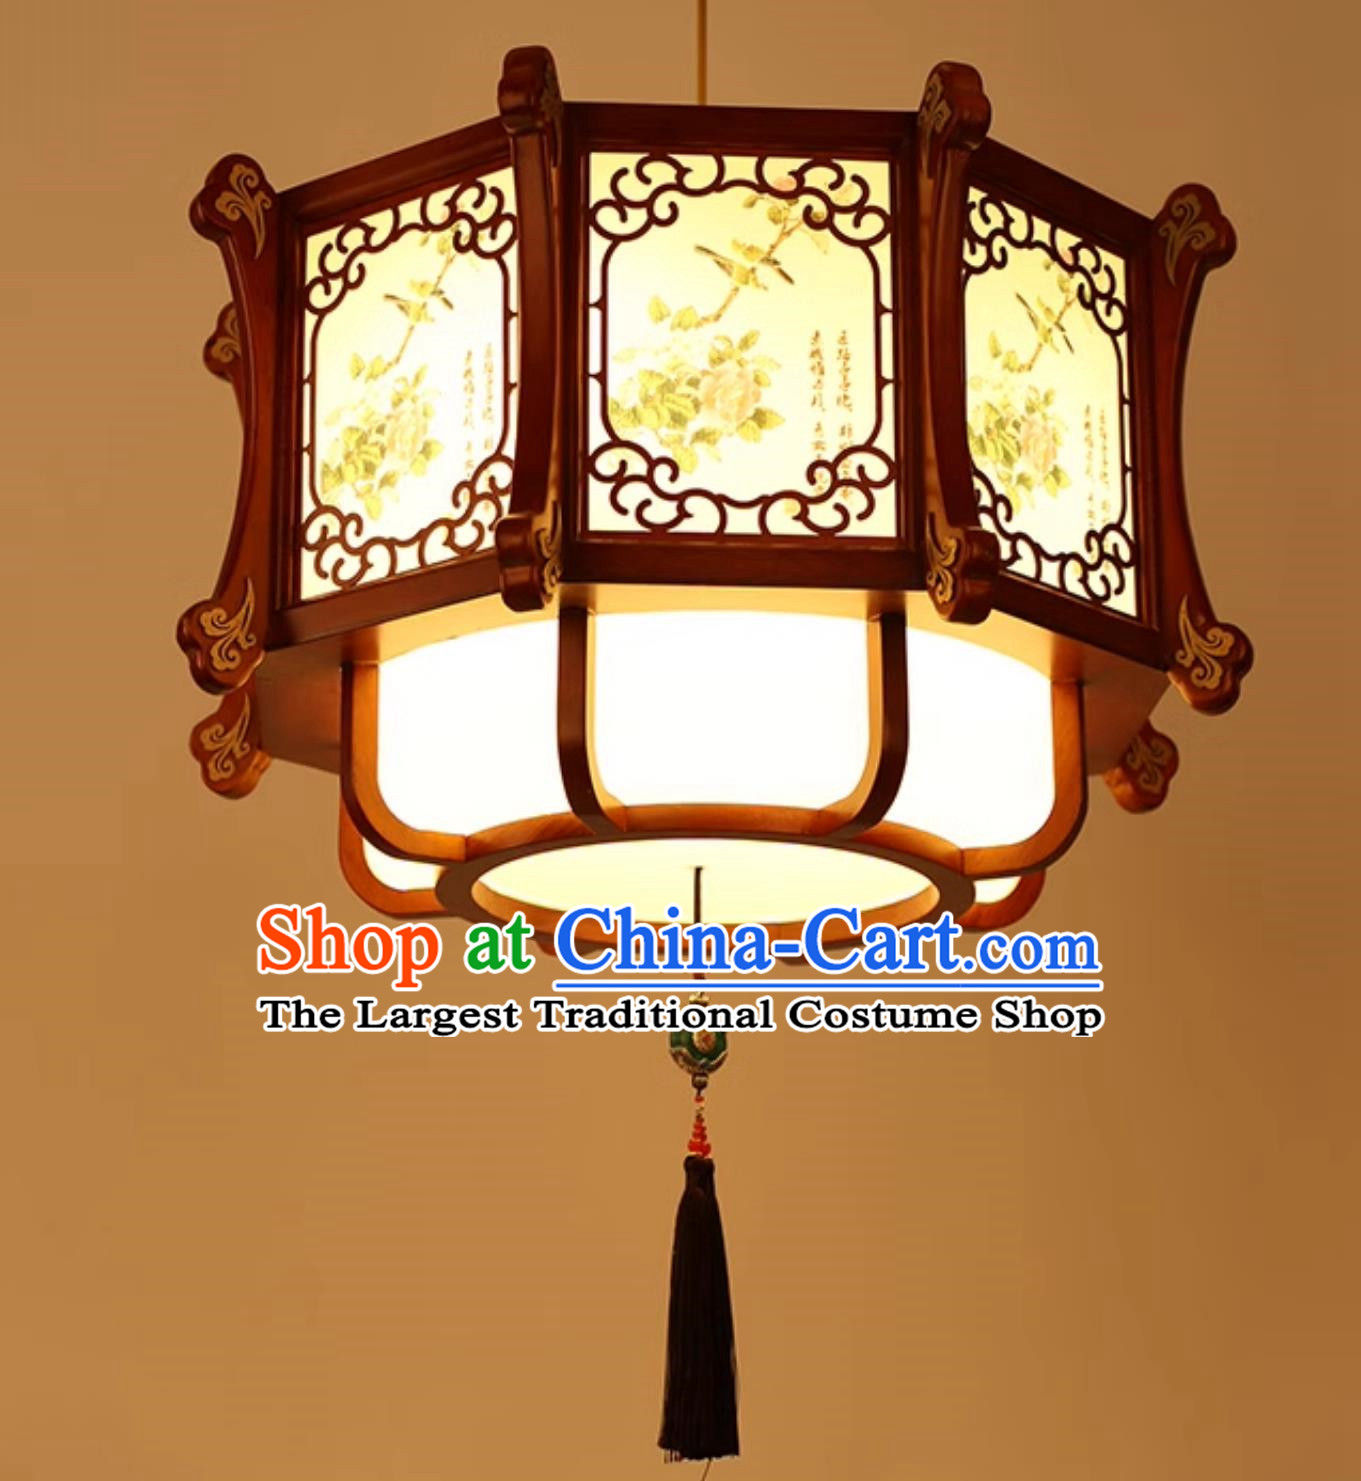 24 Inches High School Style Lantern Chandelier Solid Wood Teahouse Hot Pot Restaurant Ancient Building Restaurant Lamp Classical Palace Lamp Chinese Style